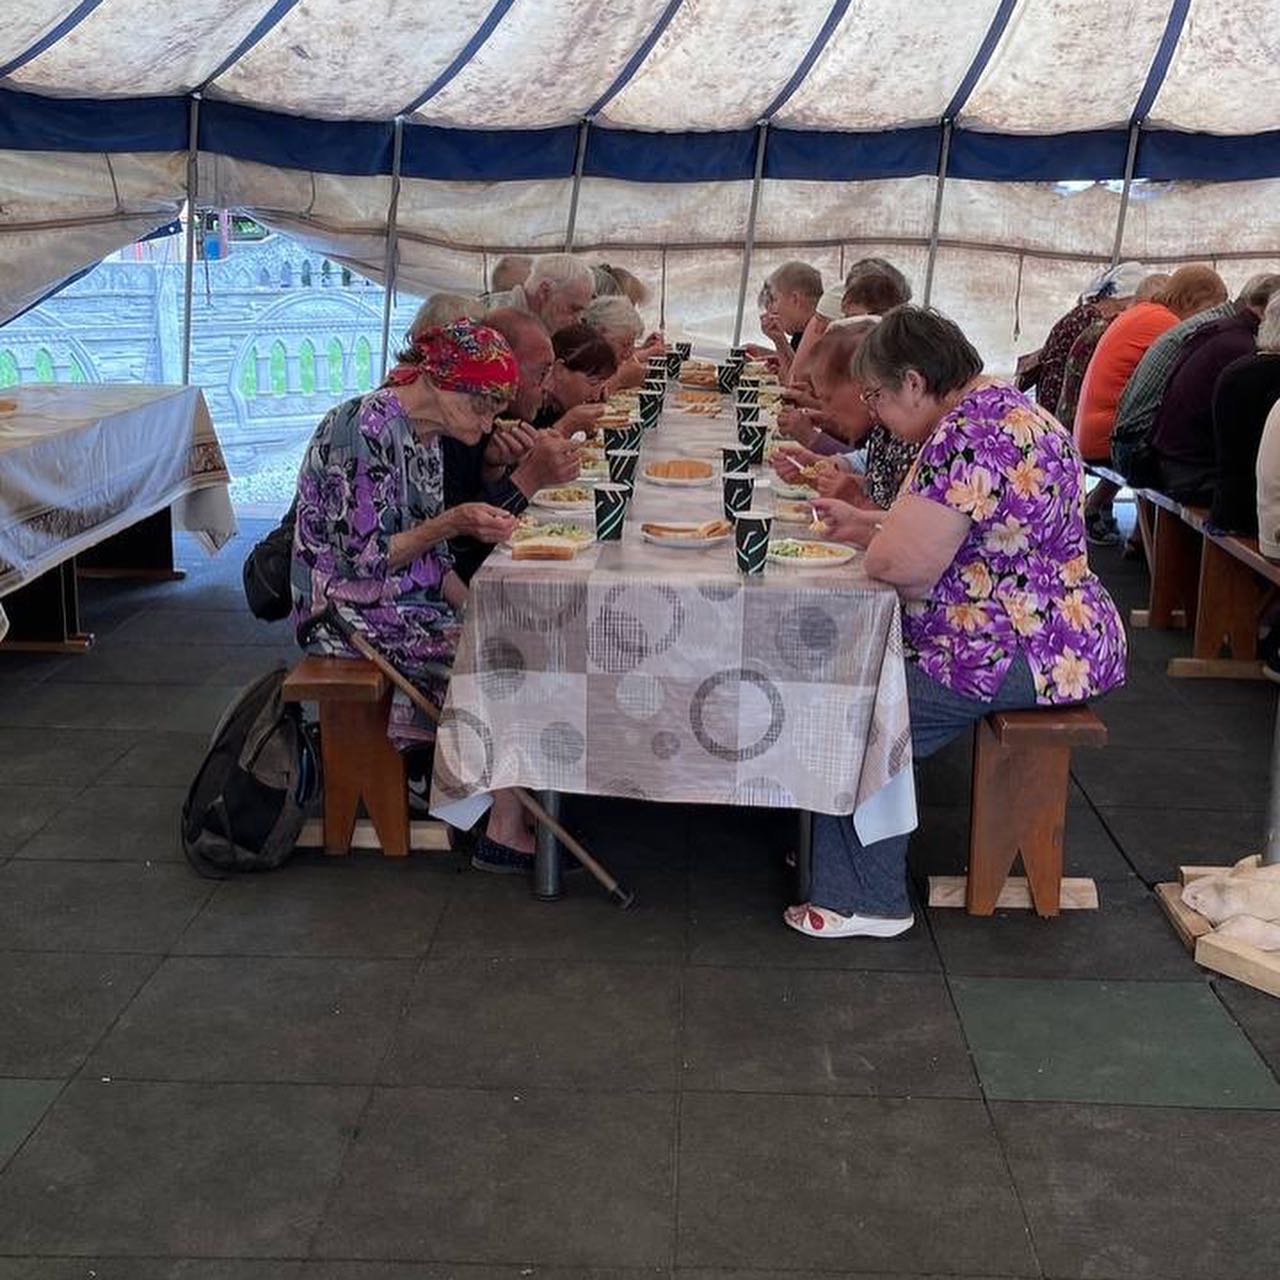 a group of people sitting at a table in a tent.